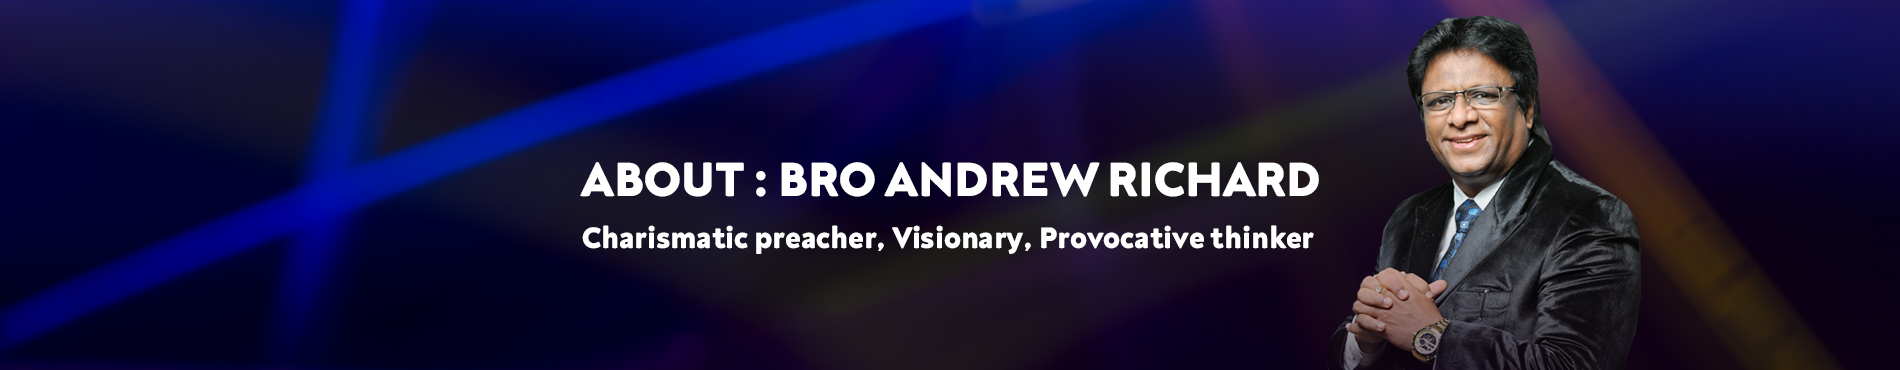 Bro Andrew Richard is a charismatic preacher, Visionary, Provocative thinker who opeartes Grace Ministry in Mangalore, a global humanitarian organization in India with the aim of reaching the unreached.